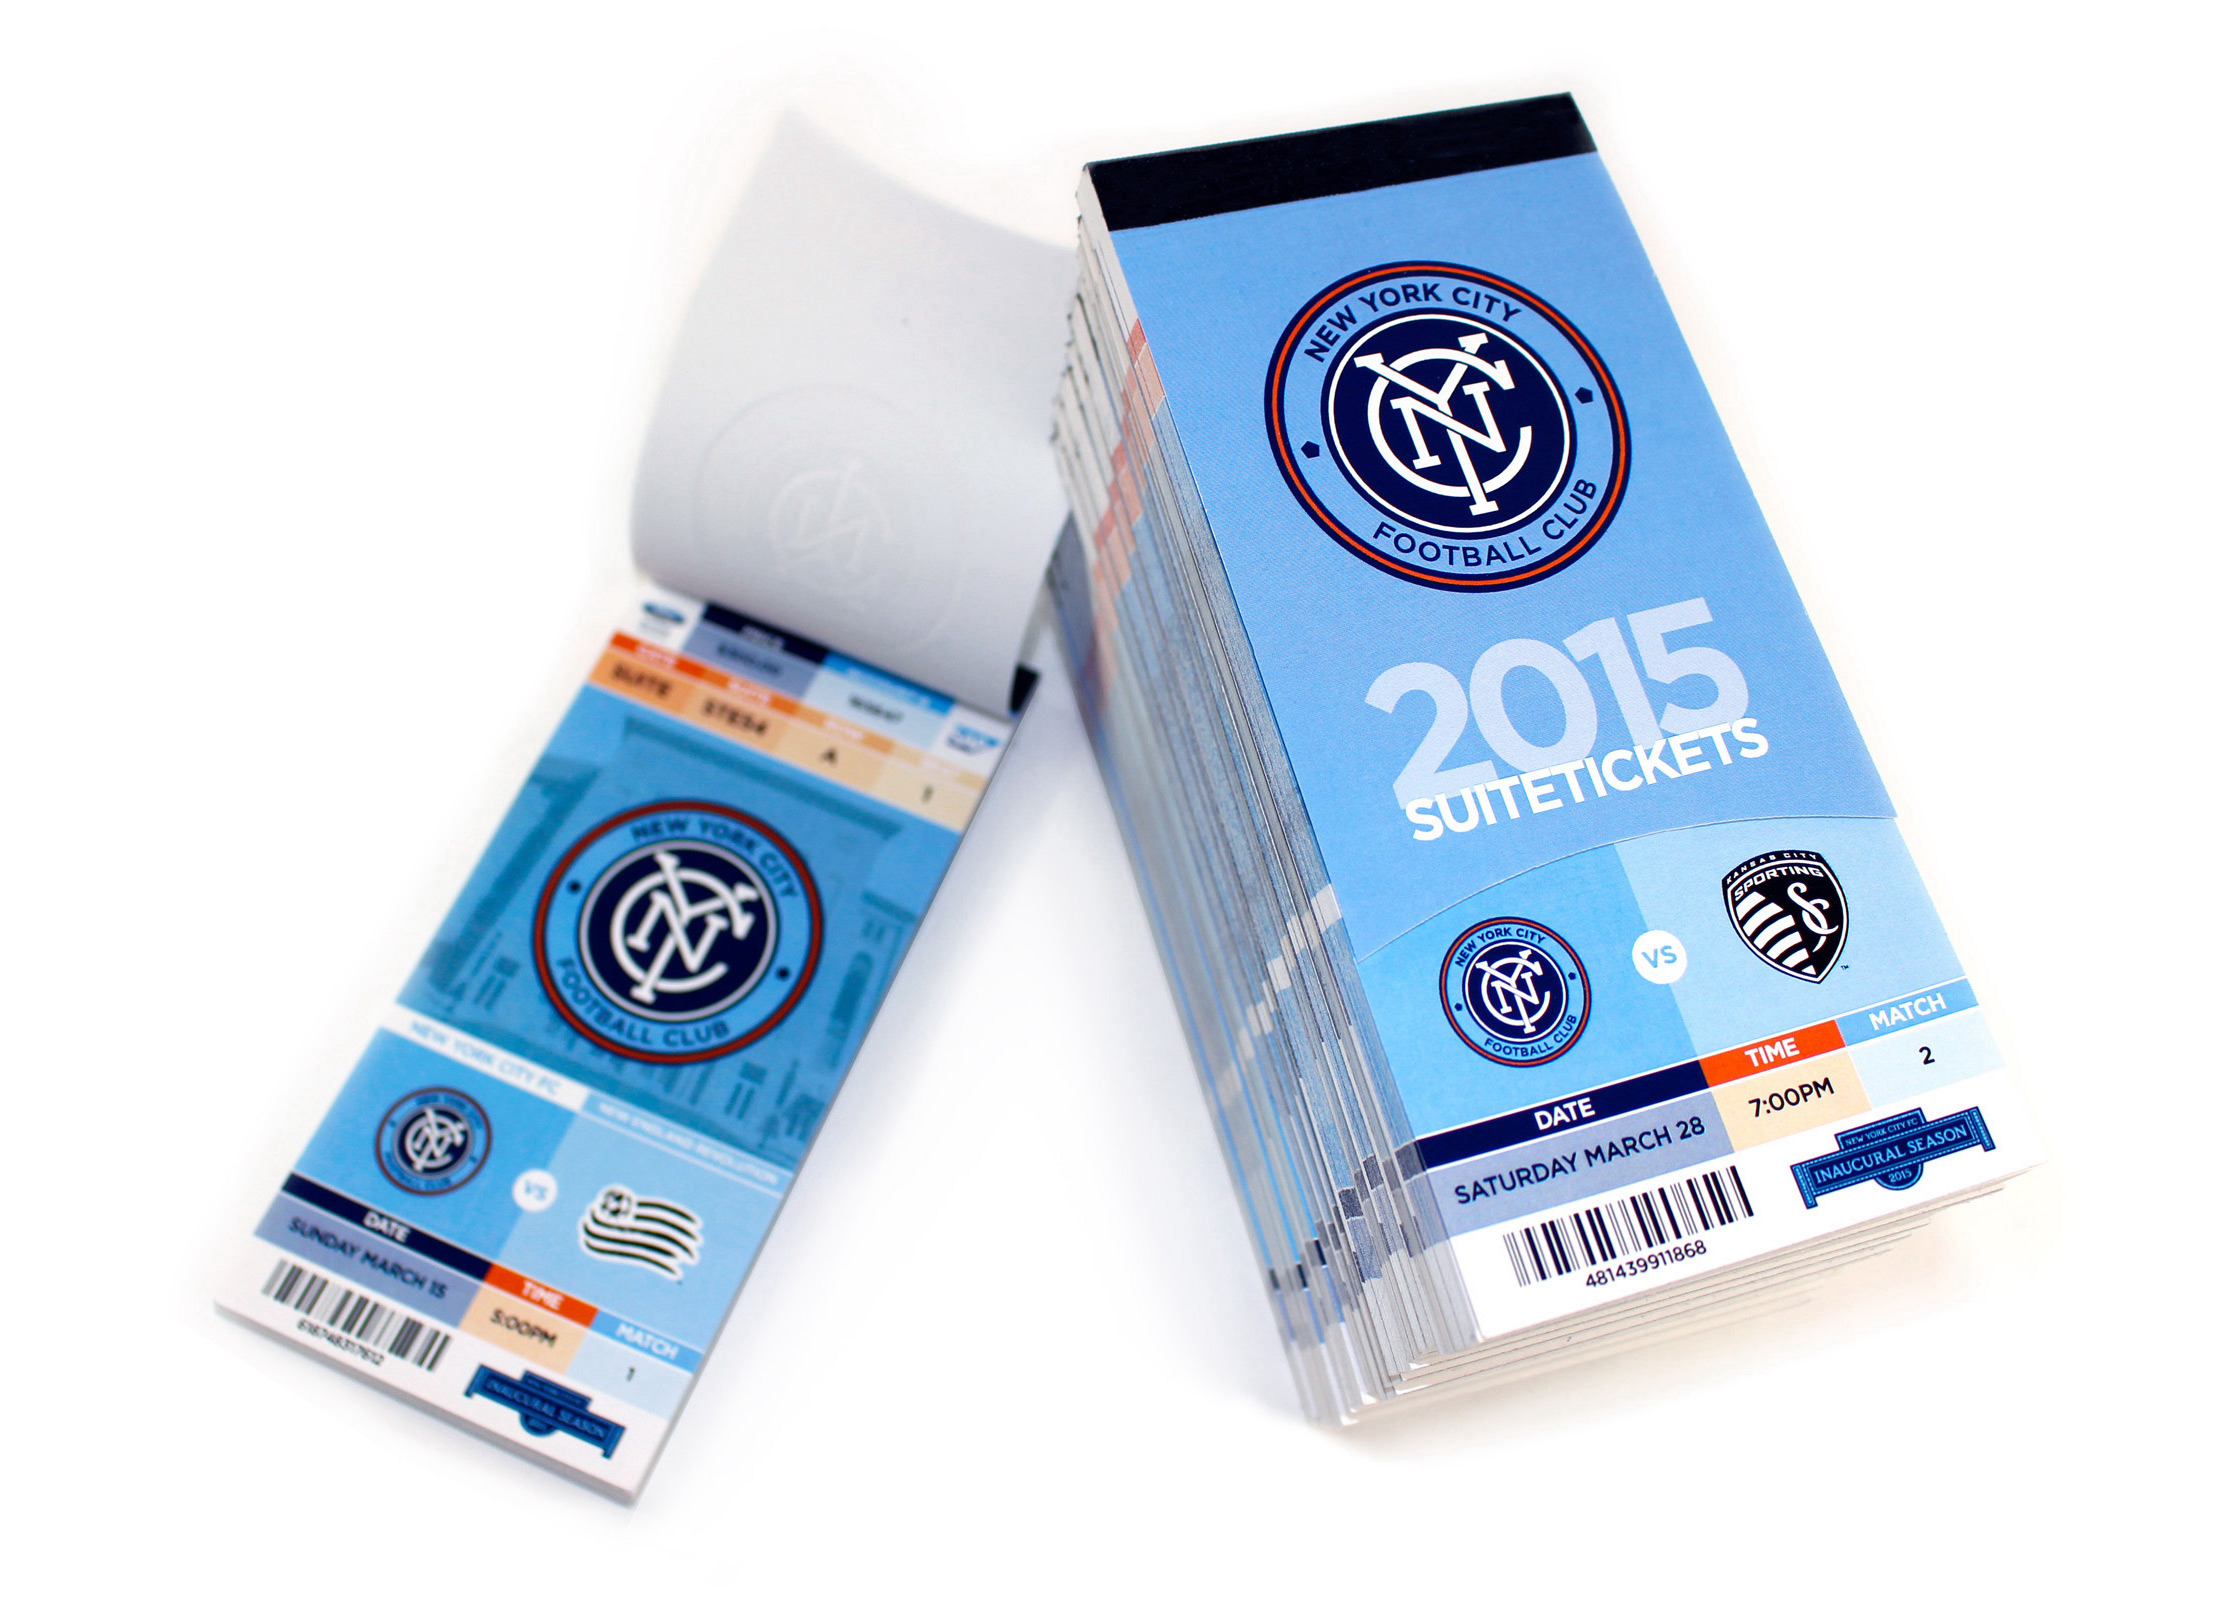 NYCFC-SeasonTicketHolder-Suitetickets-pile-open-copy-3